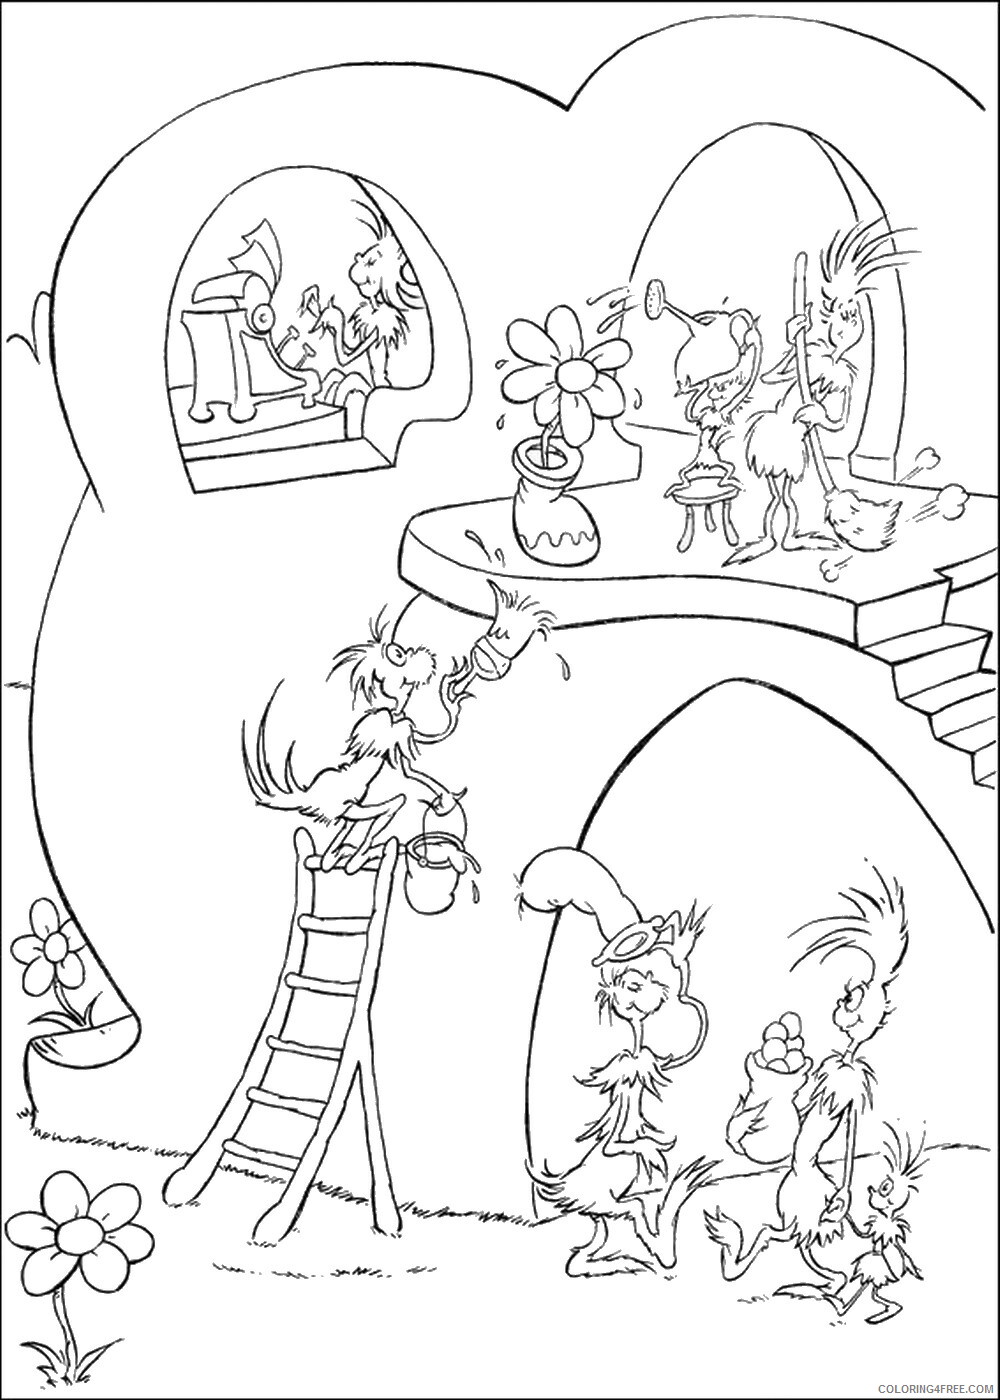 Horton Hears a Who Coloring Pages TV Film horton_cl_19 Printable 2020 03741 Coloring4free